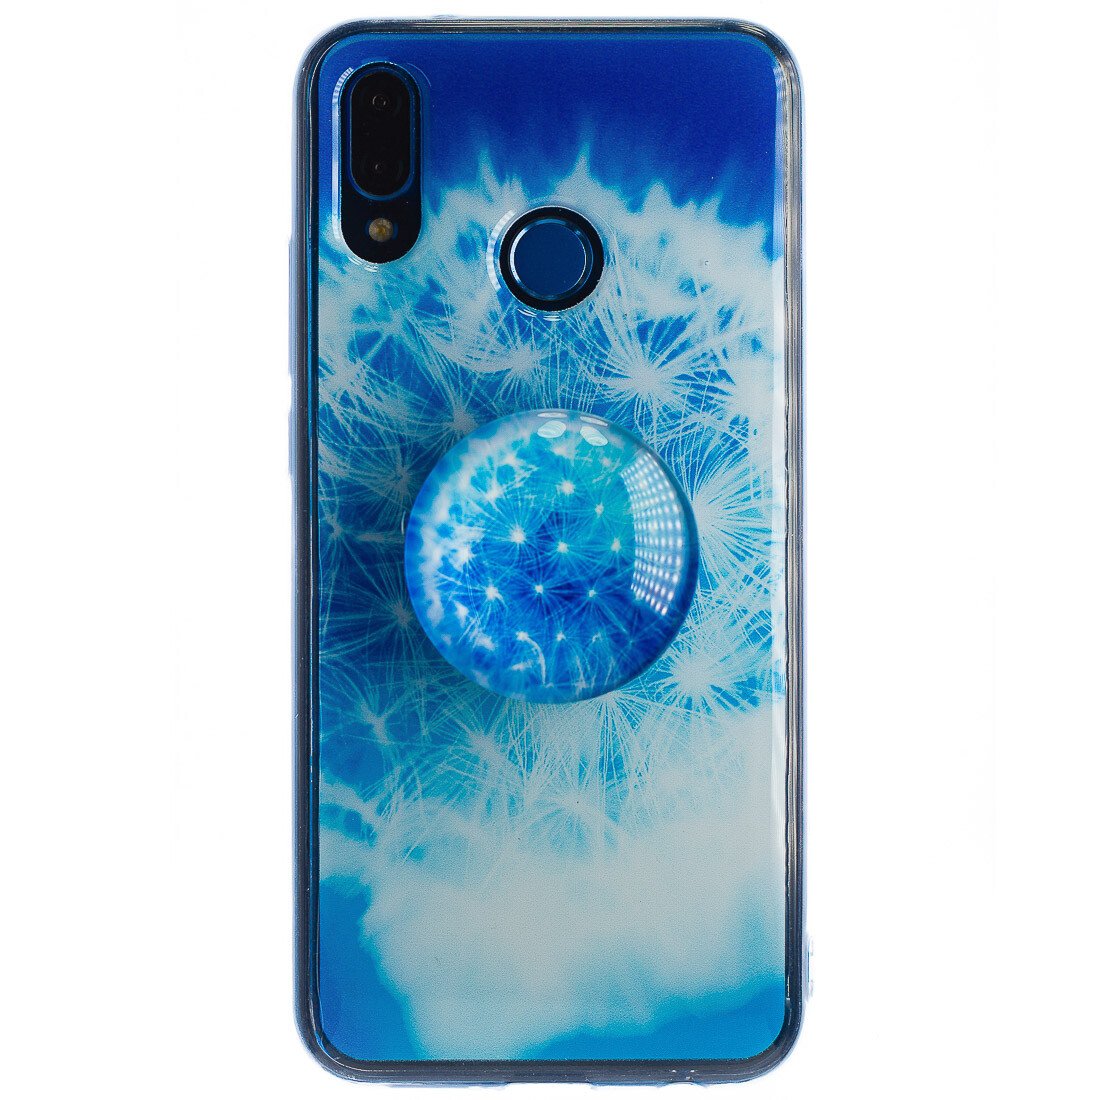 Husa Silicon cu suport Huawei P20 Lite, Floral thumb